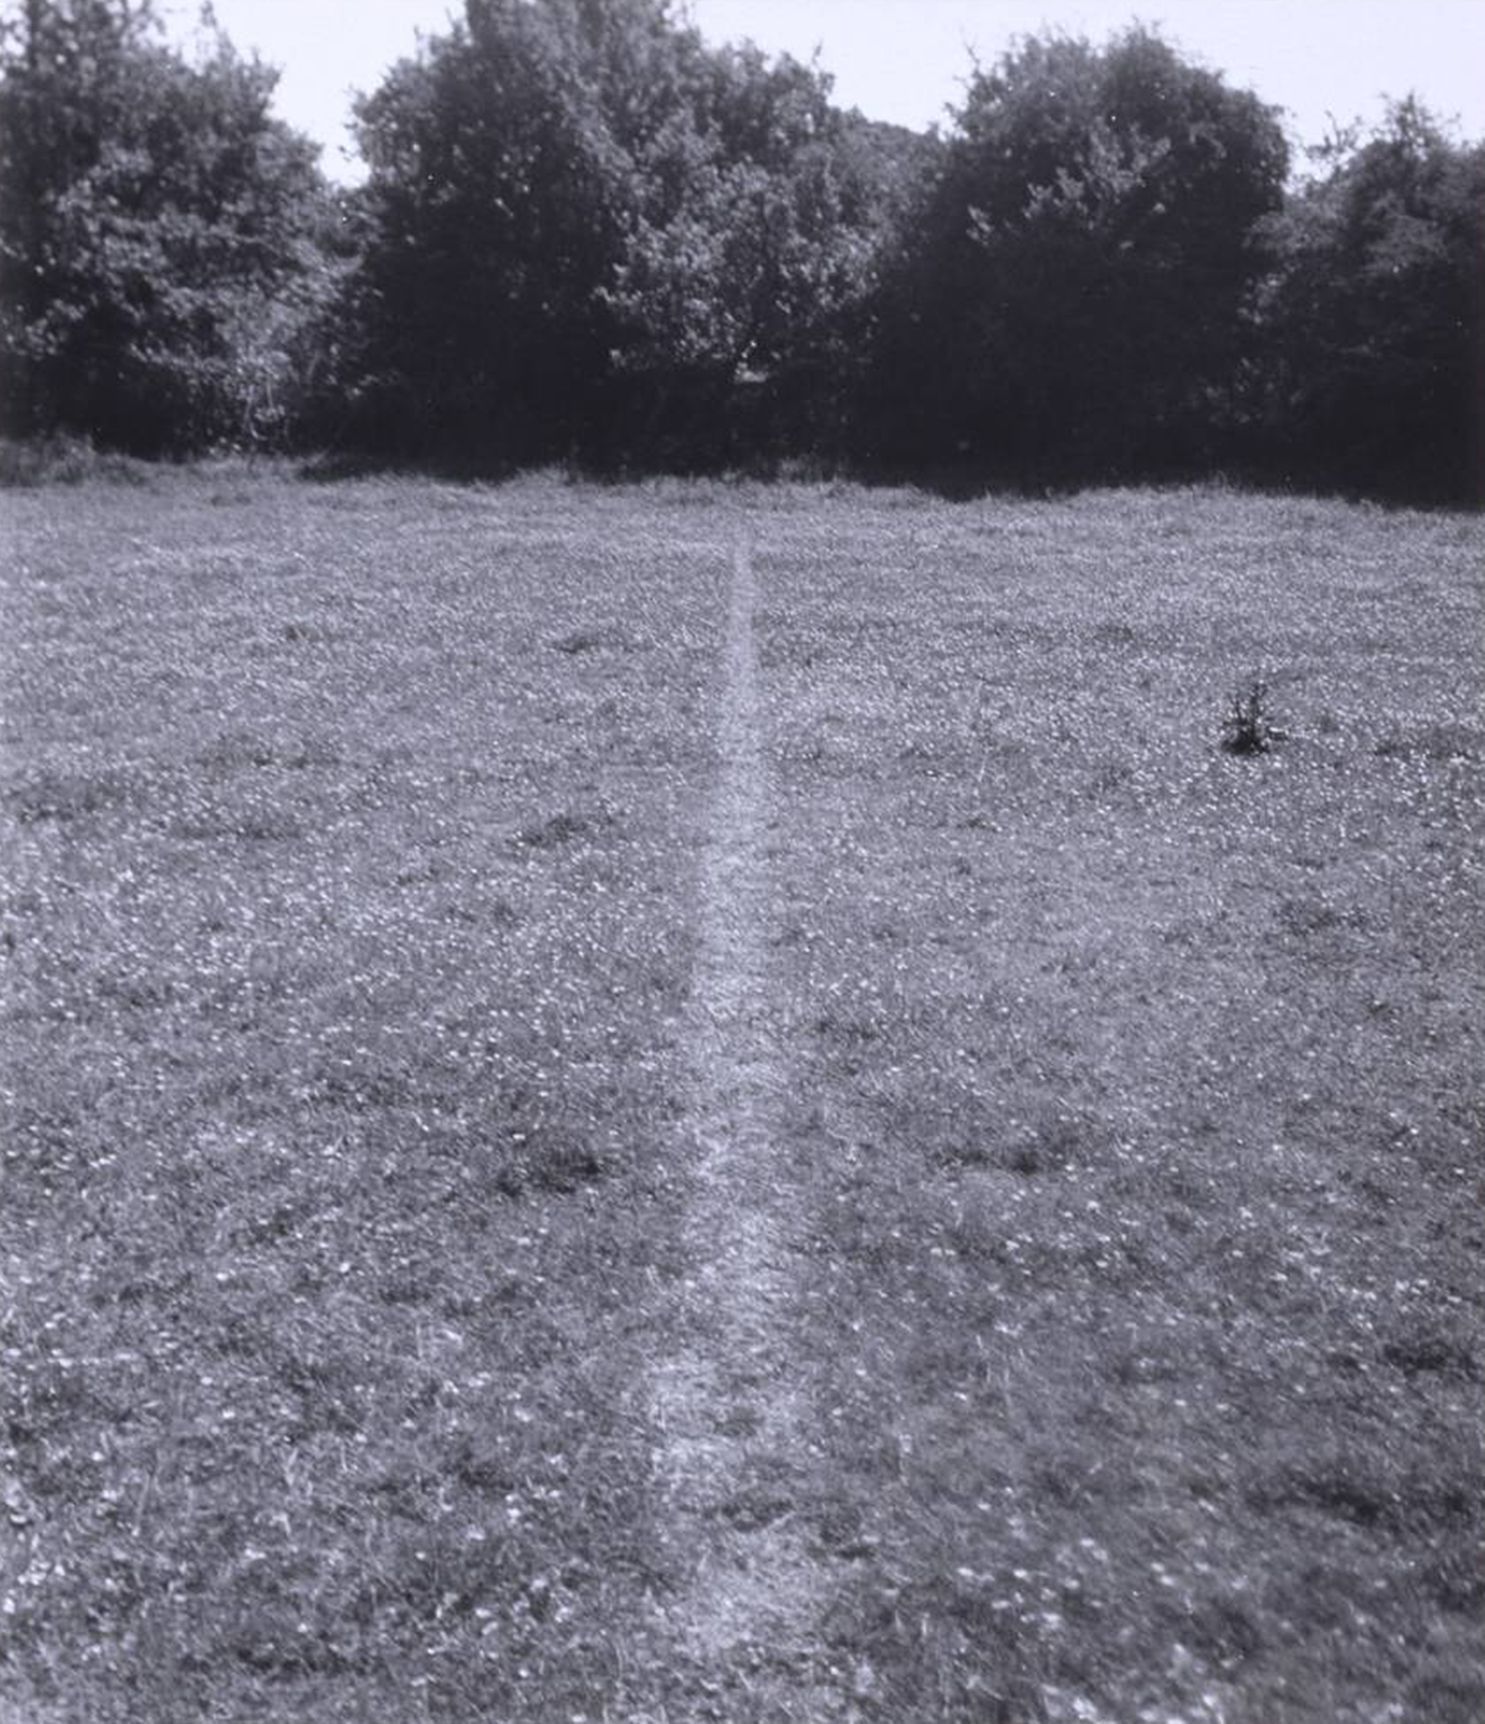 Richard Long: A Line Made by Walking, 1967